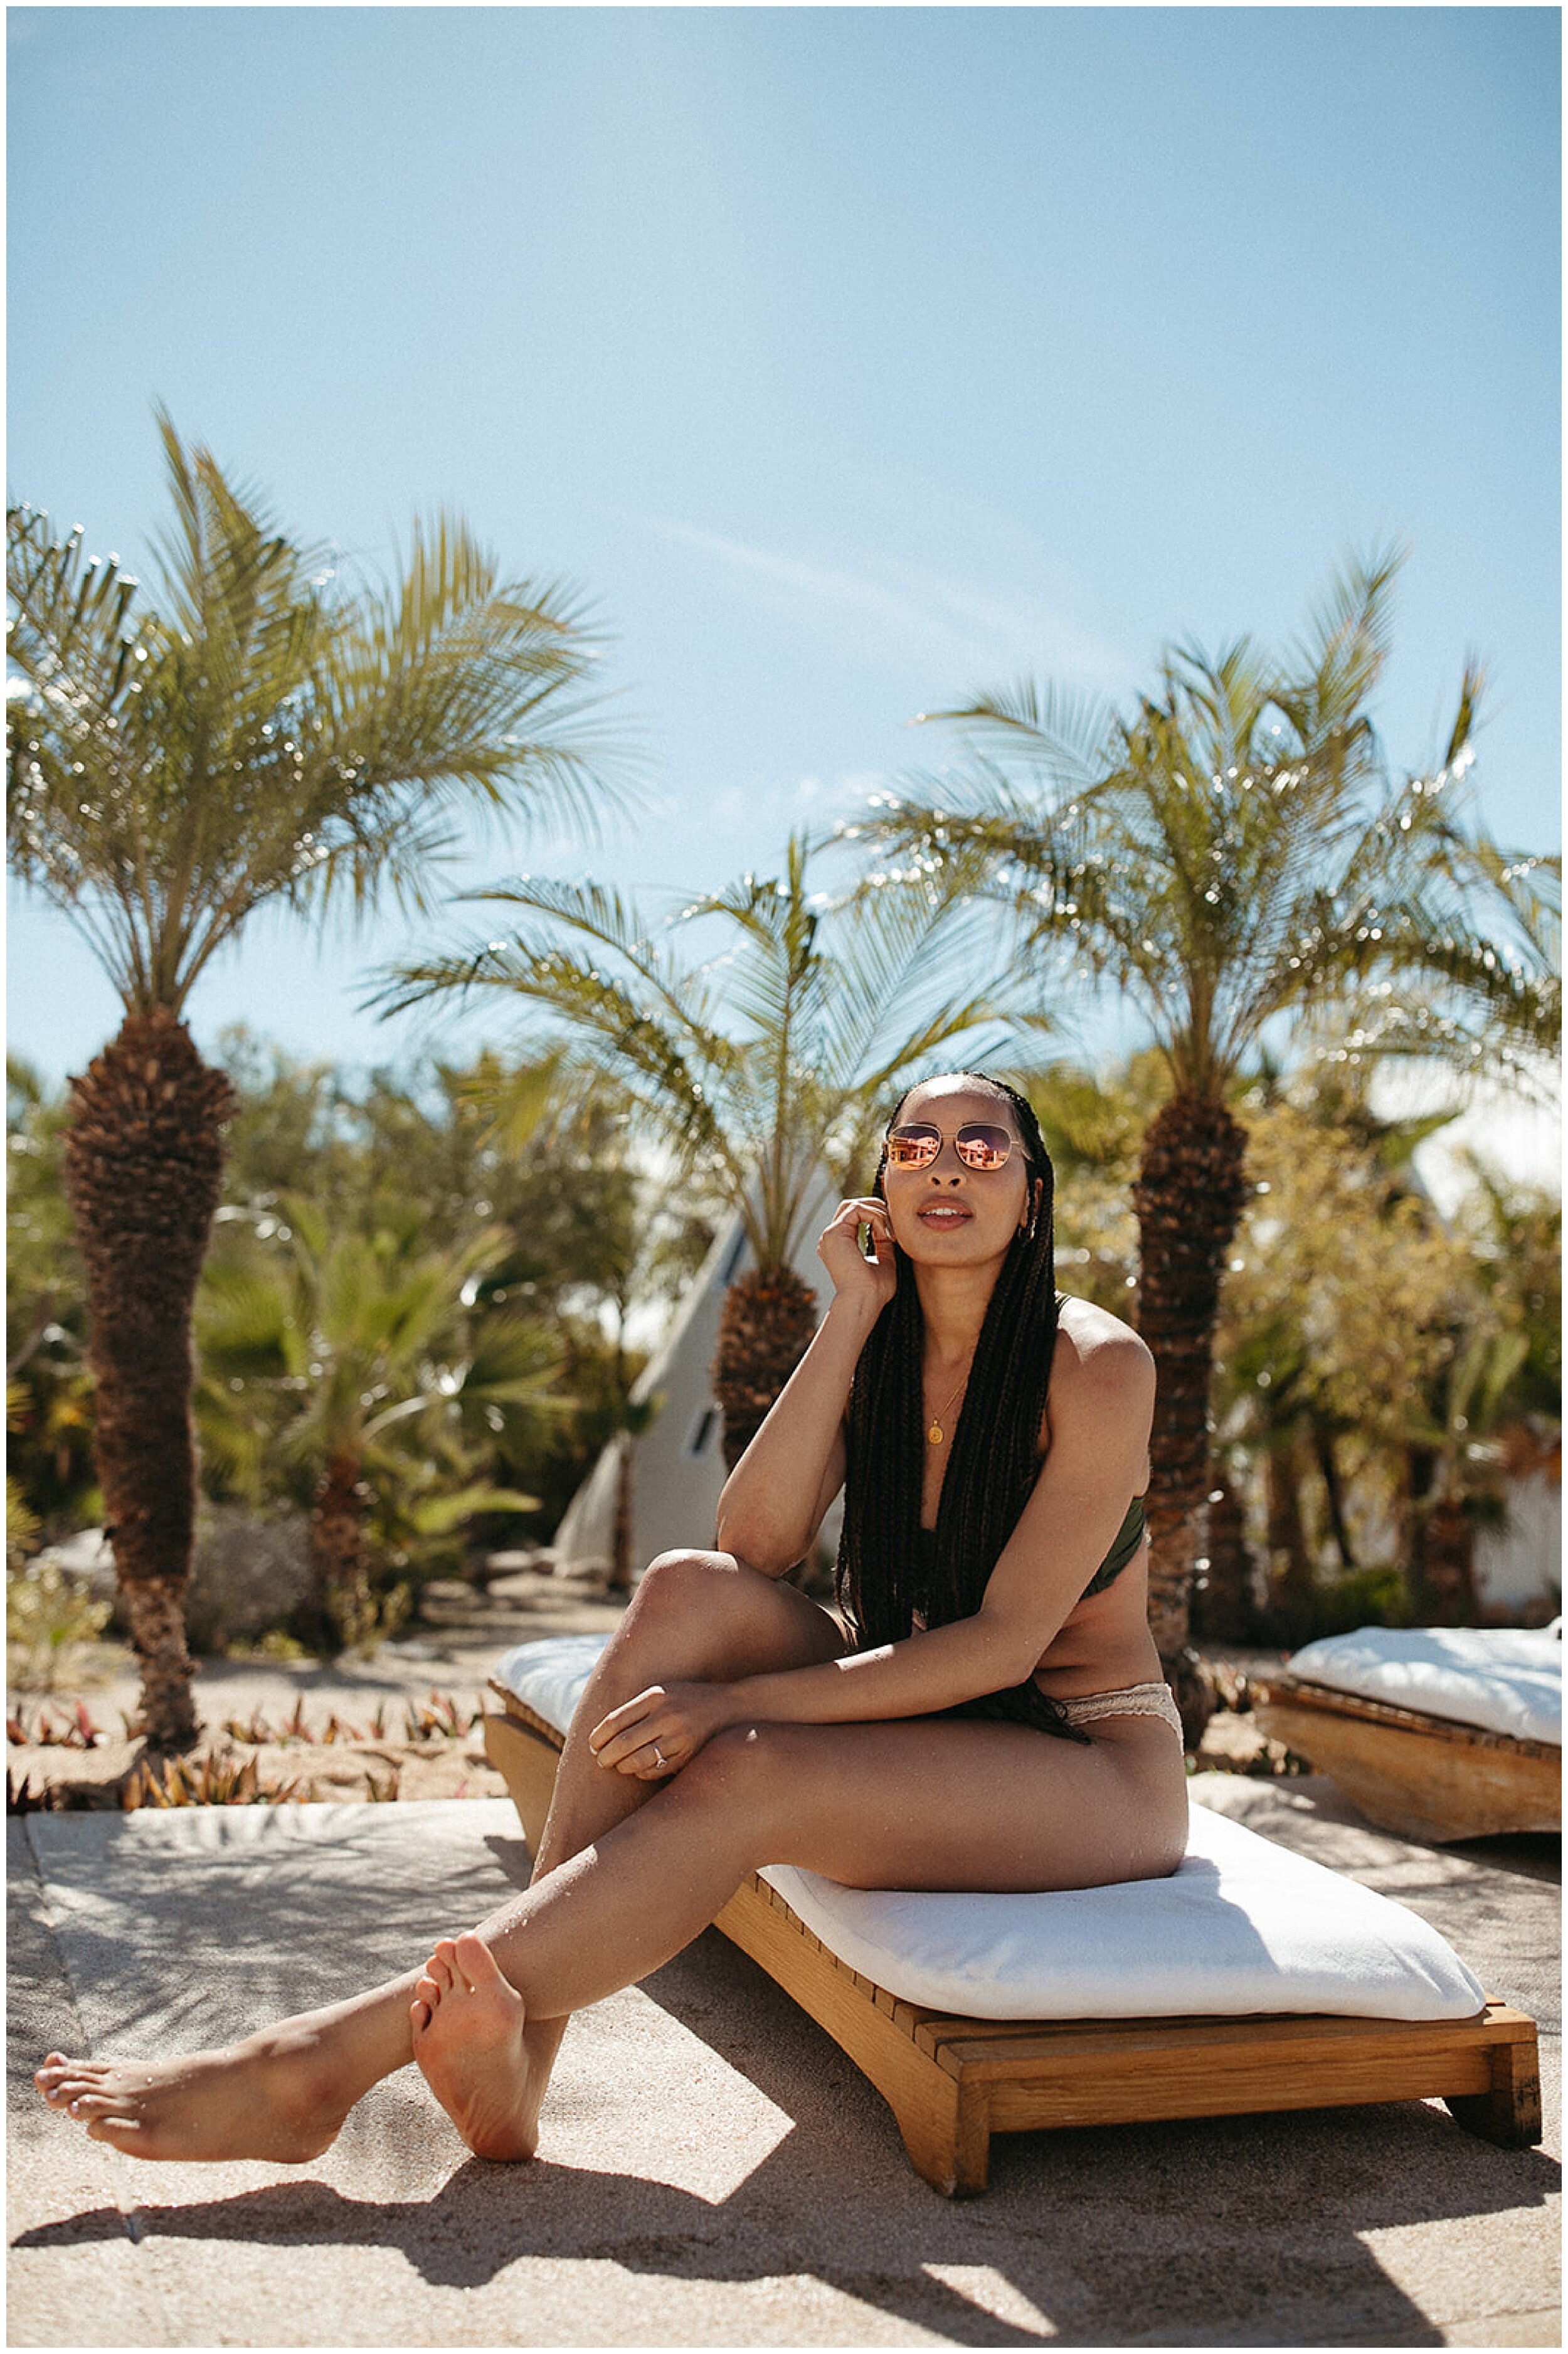 woman posing on poolchair for editorial photo